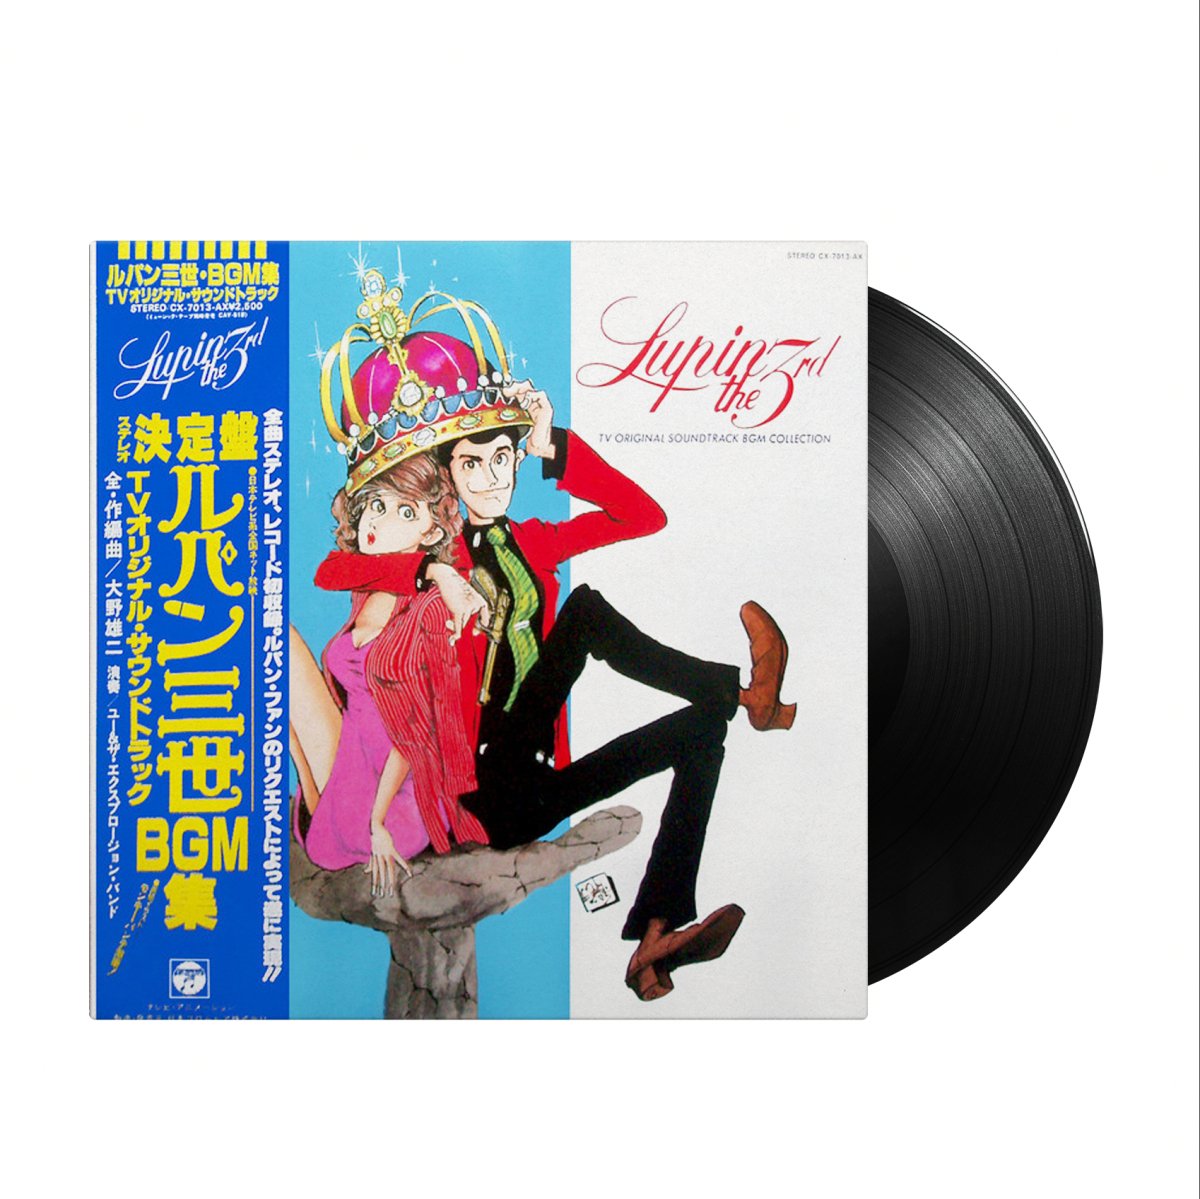 Yuji Ohno, You & Explosion Band - Lupin The 3rd: TV Original Soundtrack BGM Collection (Japan Import) - Inner Ocean Records